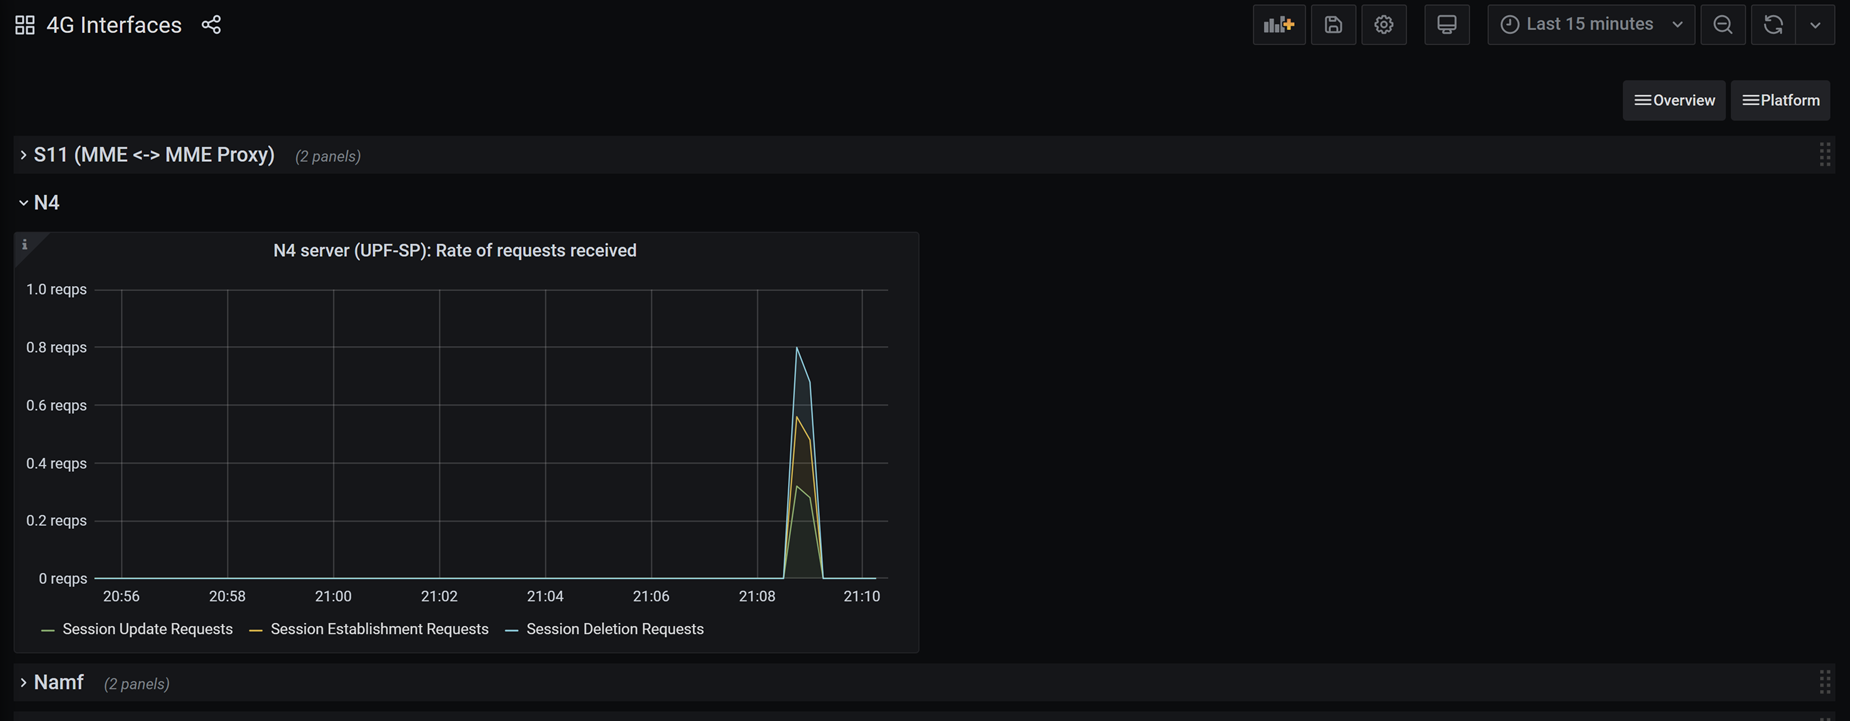 Screenshot of the 4G Interfaces dashboard. Panels related to activity on the packet core instance's 4G interfaces are shown.